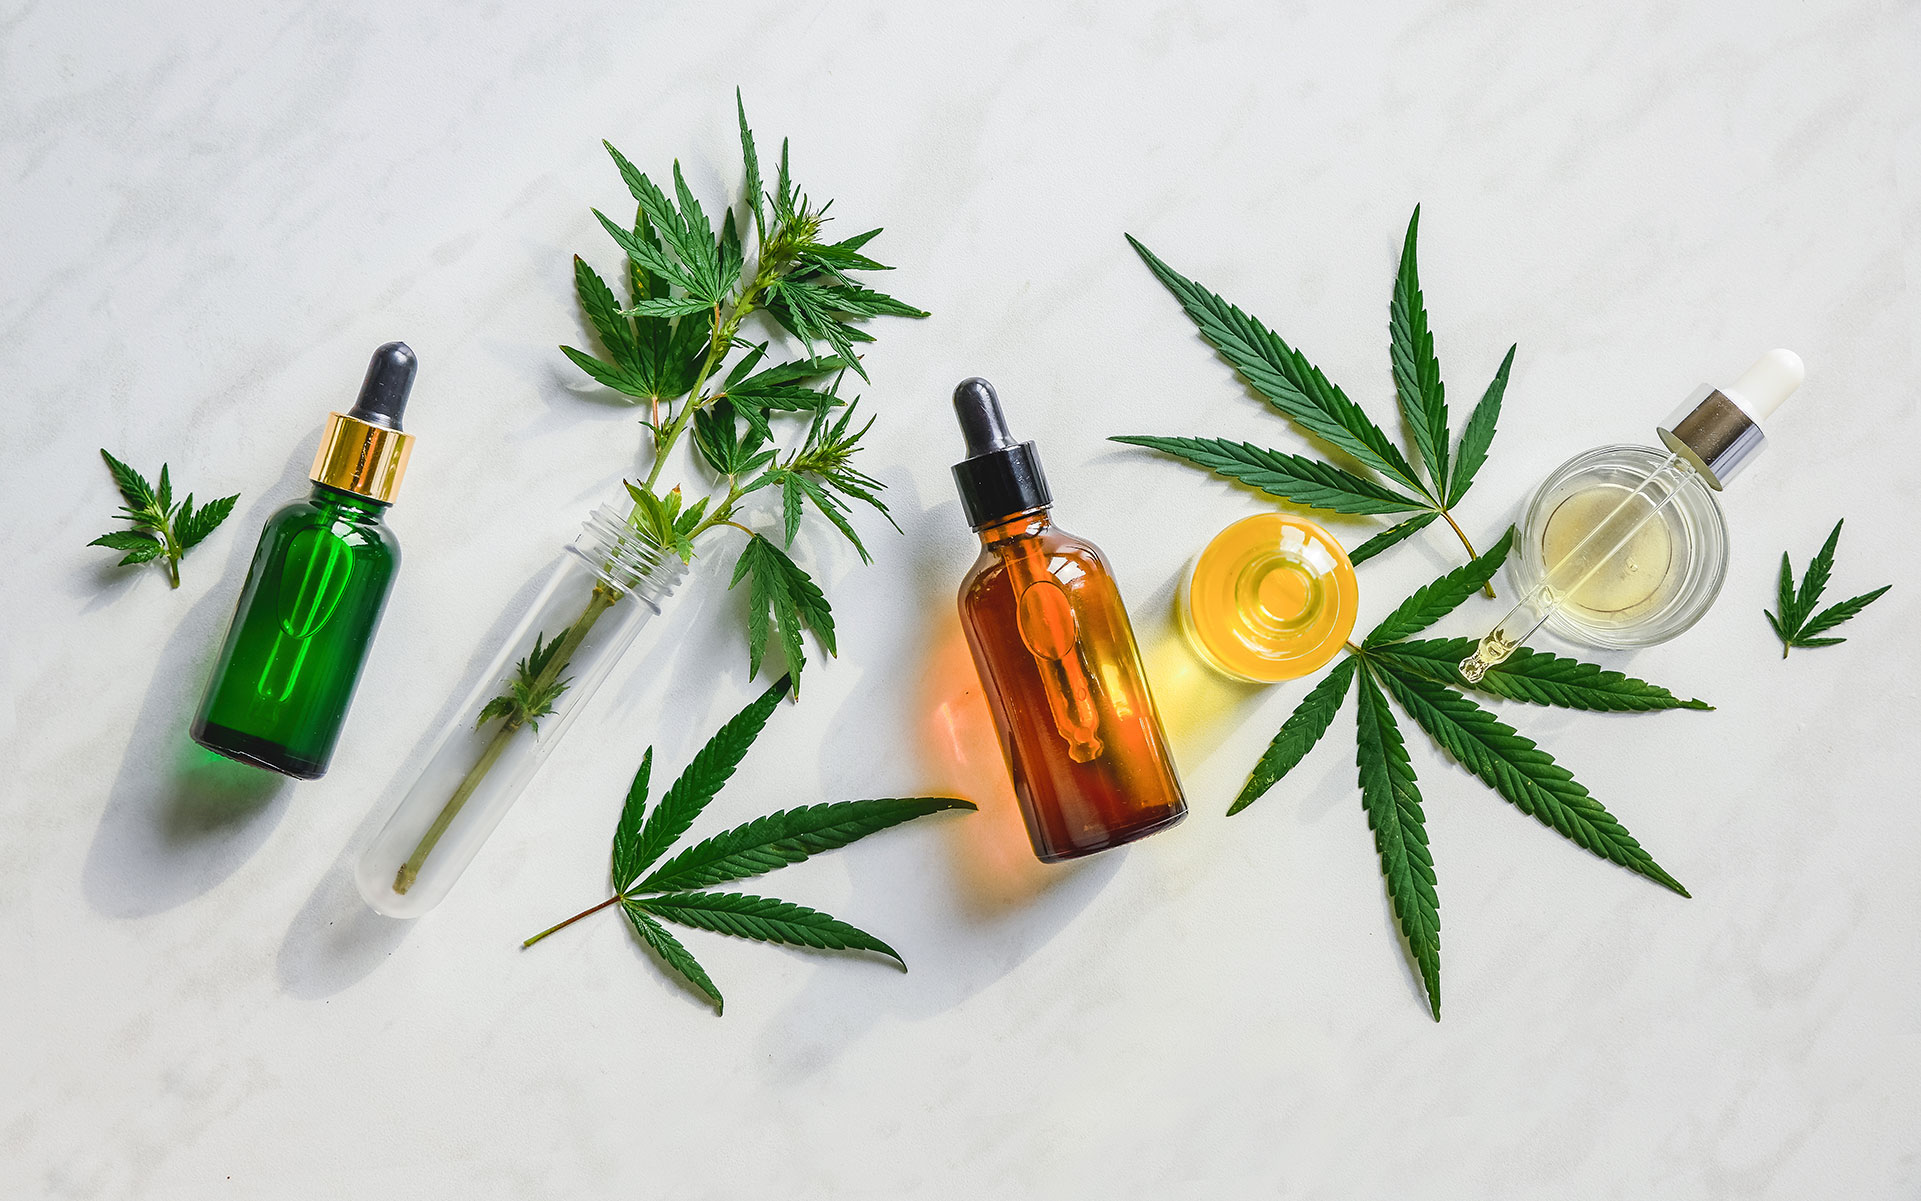 Where Can I Buy Cbd Oil In Gulfport Ms - Cbd|Oil|Cannabidiol|Products|View|Abstract|Effects|Hemp|Cannabis|Product|Thc|Pain|People|Health|Body|Plant|Cannabinoids|Medications|Oils|Drug|Benefits|System|Study|Marijuana|Anxiety|Side|Research|Effect|Liver|Quality|Treatment|Studies|Epilepsy|Symptoms|Gummies|Compounds|Dose|Time|Inflammation|Bottle|Cbd Oil|View Abstract|Side Effects|Cbd Products|Endocannabinoid System|Multiple Sclerosis|Cbd Oils|Cbd Gummies|Cannabis Plant|Hemp Oil|Cbd Product|Hemp Plant|United States|Cytochrome P450|Many People|Chronic Pain|Nuleaf Naturals|Royal Cbd|Full-Spectrum Cbd Oil|Drug Administration|Cbd Oil Products|Medical Marijuana|Drug Test|Heavy Metals|Clinical Trial|Clinical Trials|Cbd Oil Side|Rating Highlights|Wide Variety|Animal Studies